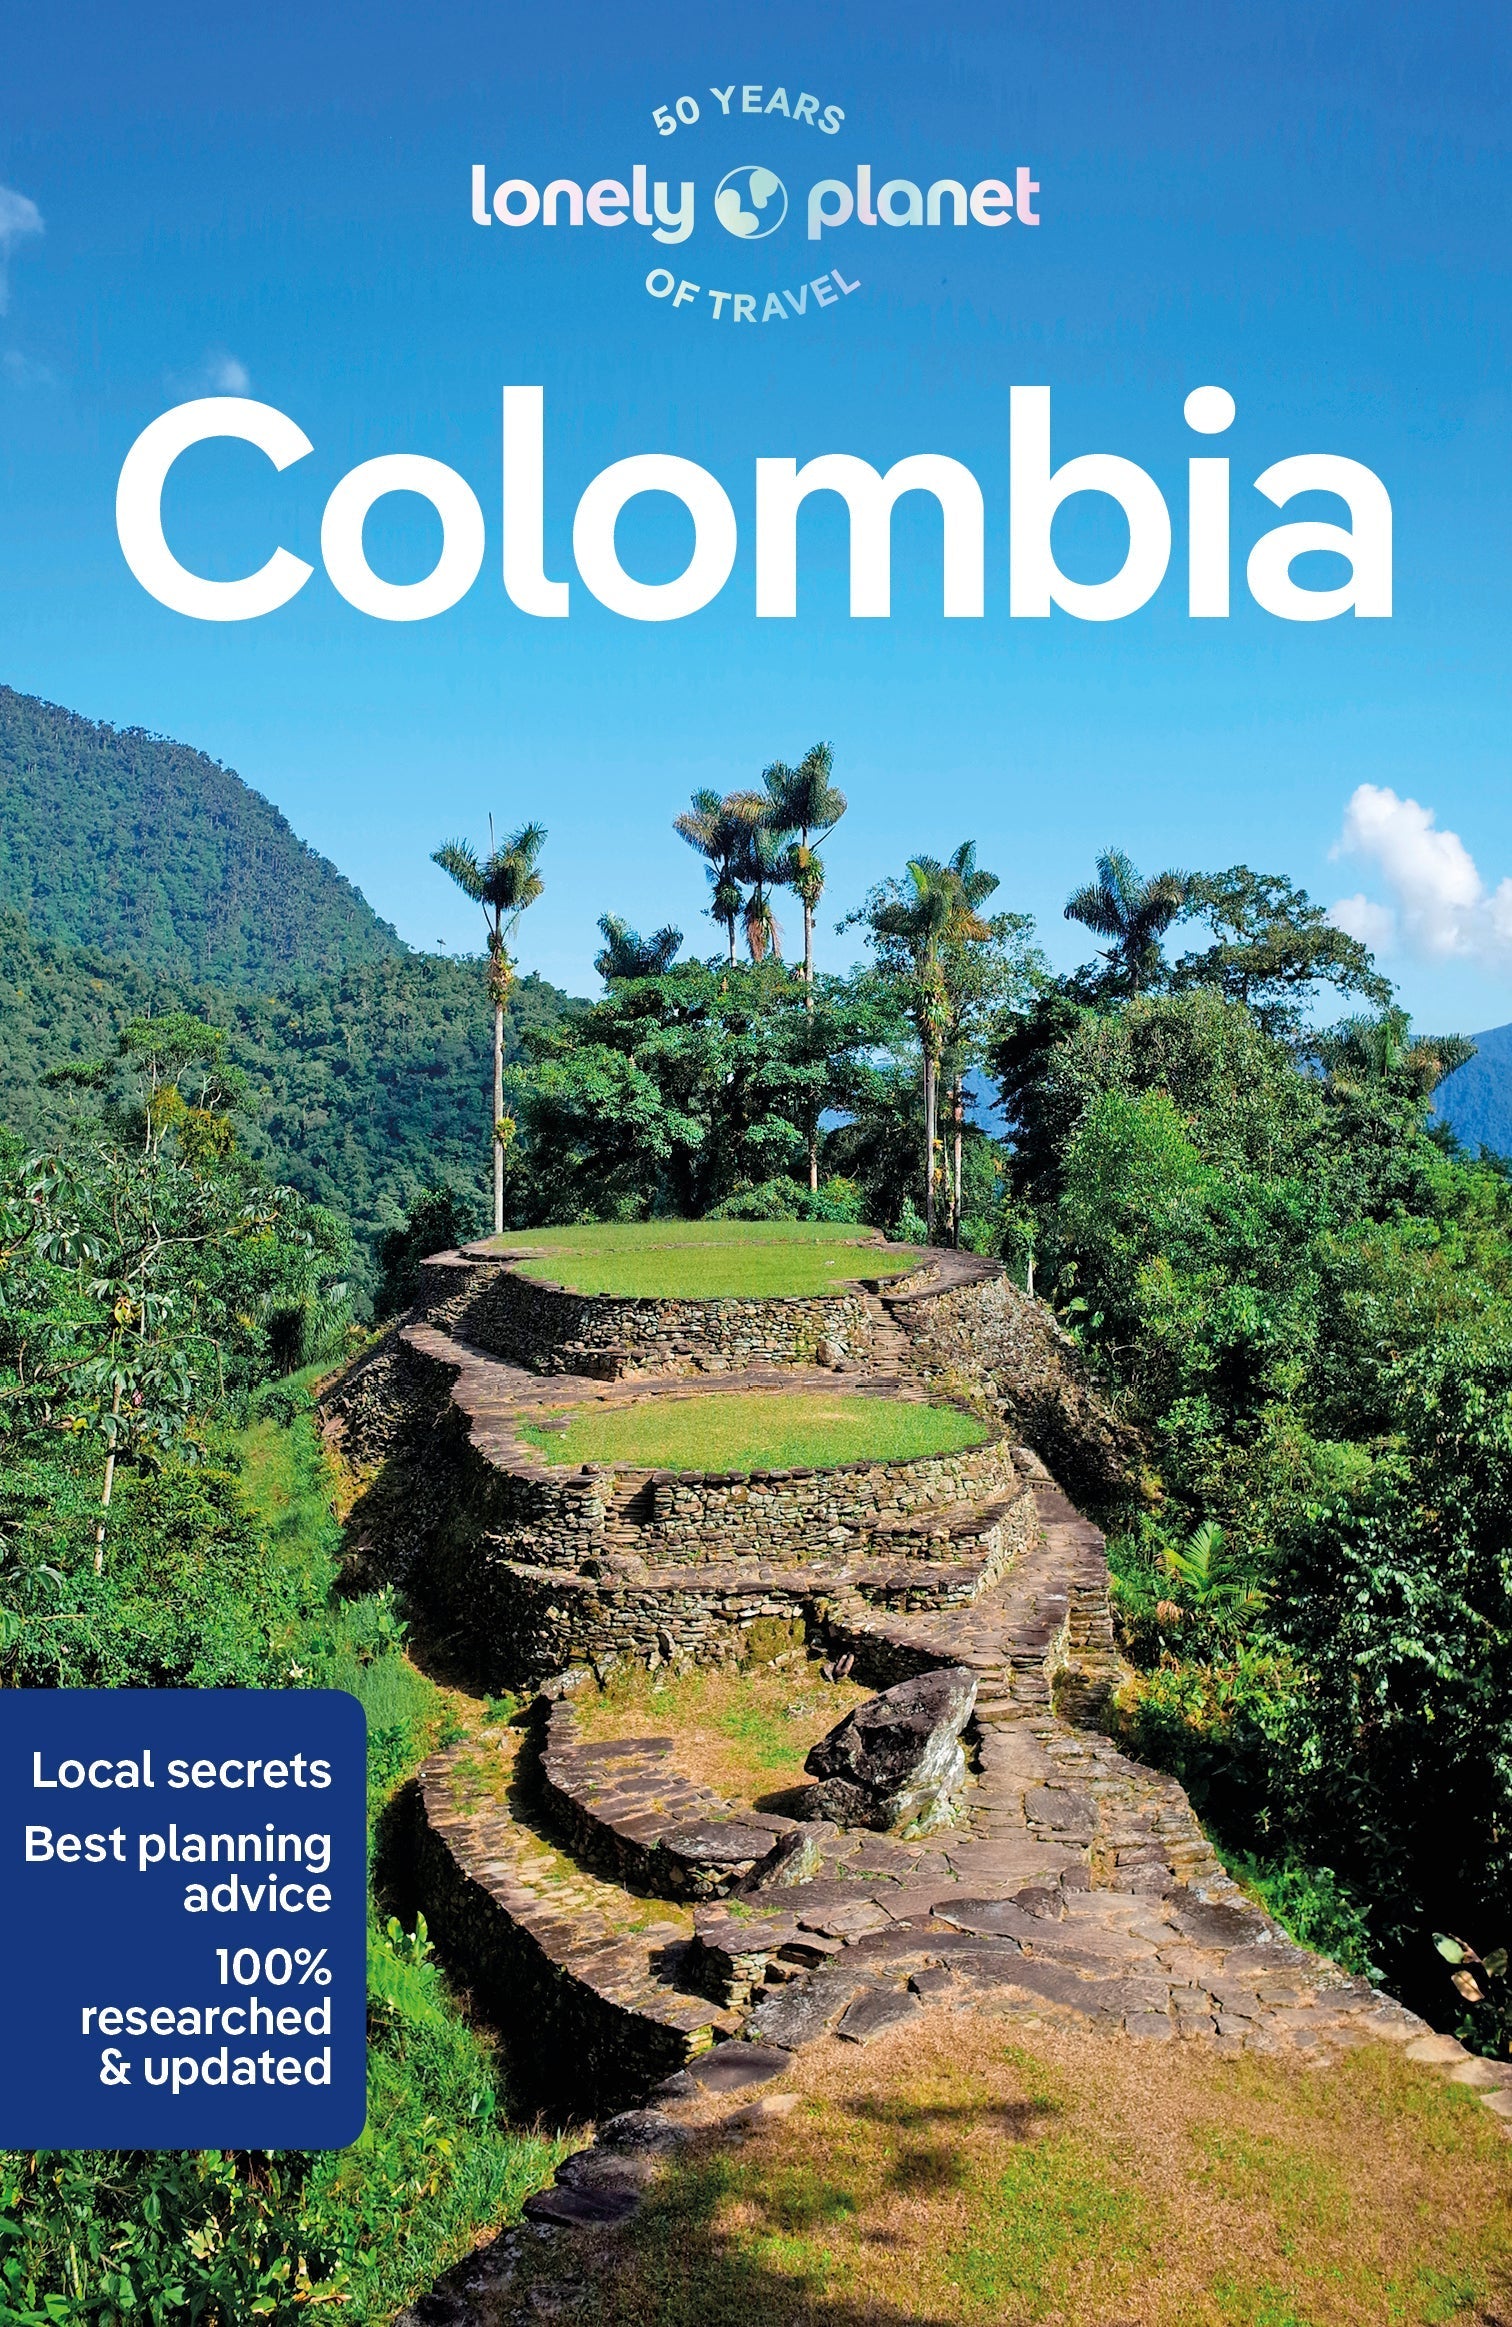 Colombia - Book